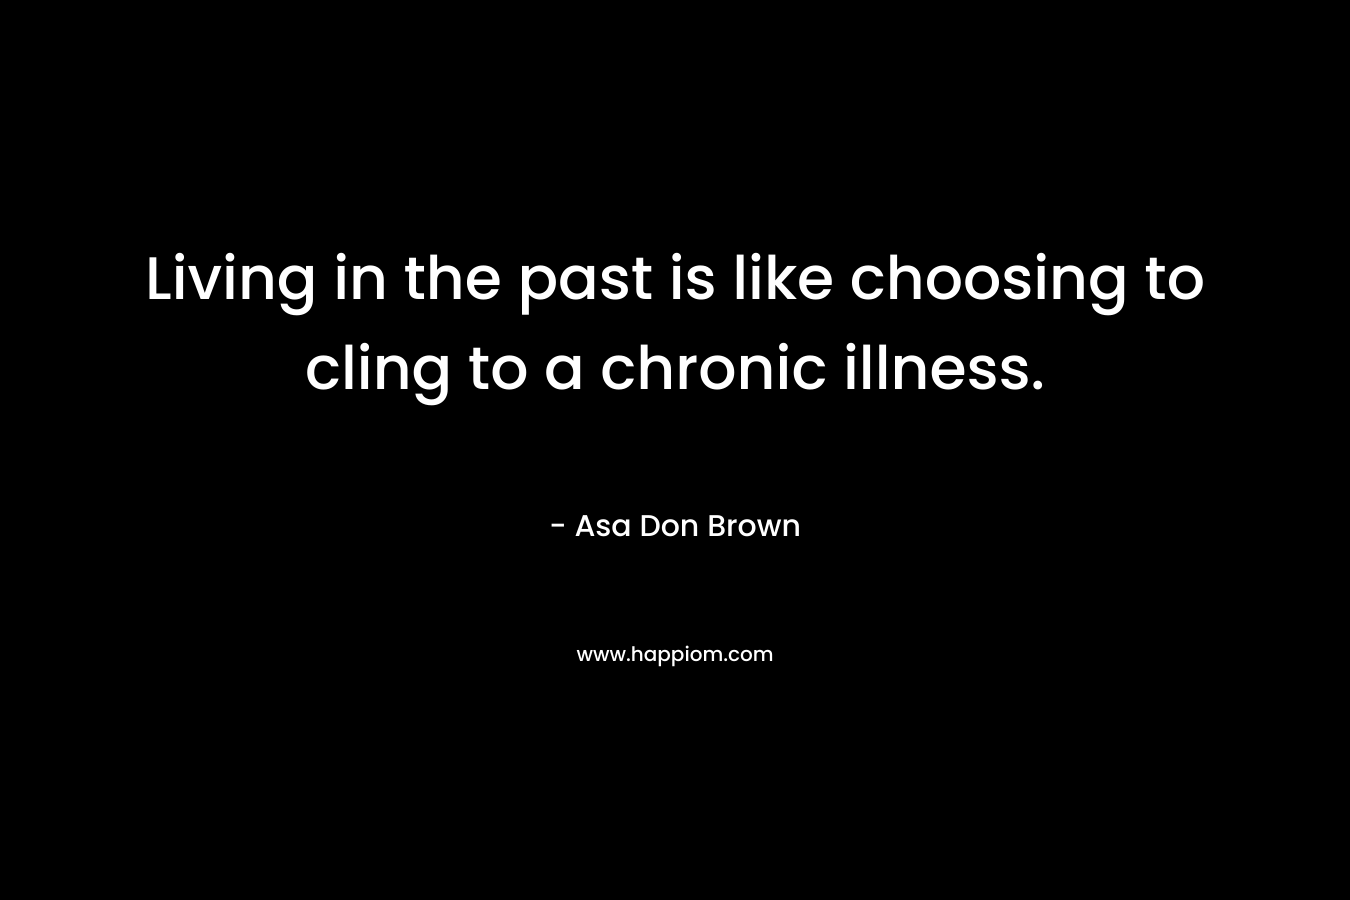 Living in the past is like choosing to cling to a chronic illness.